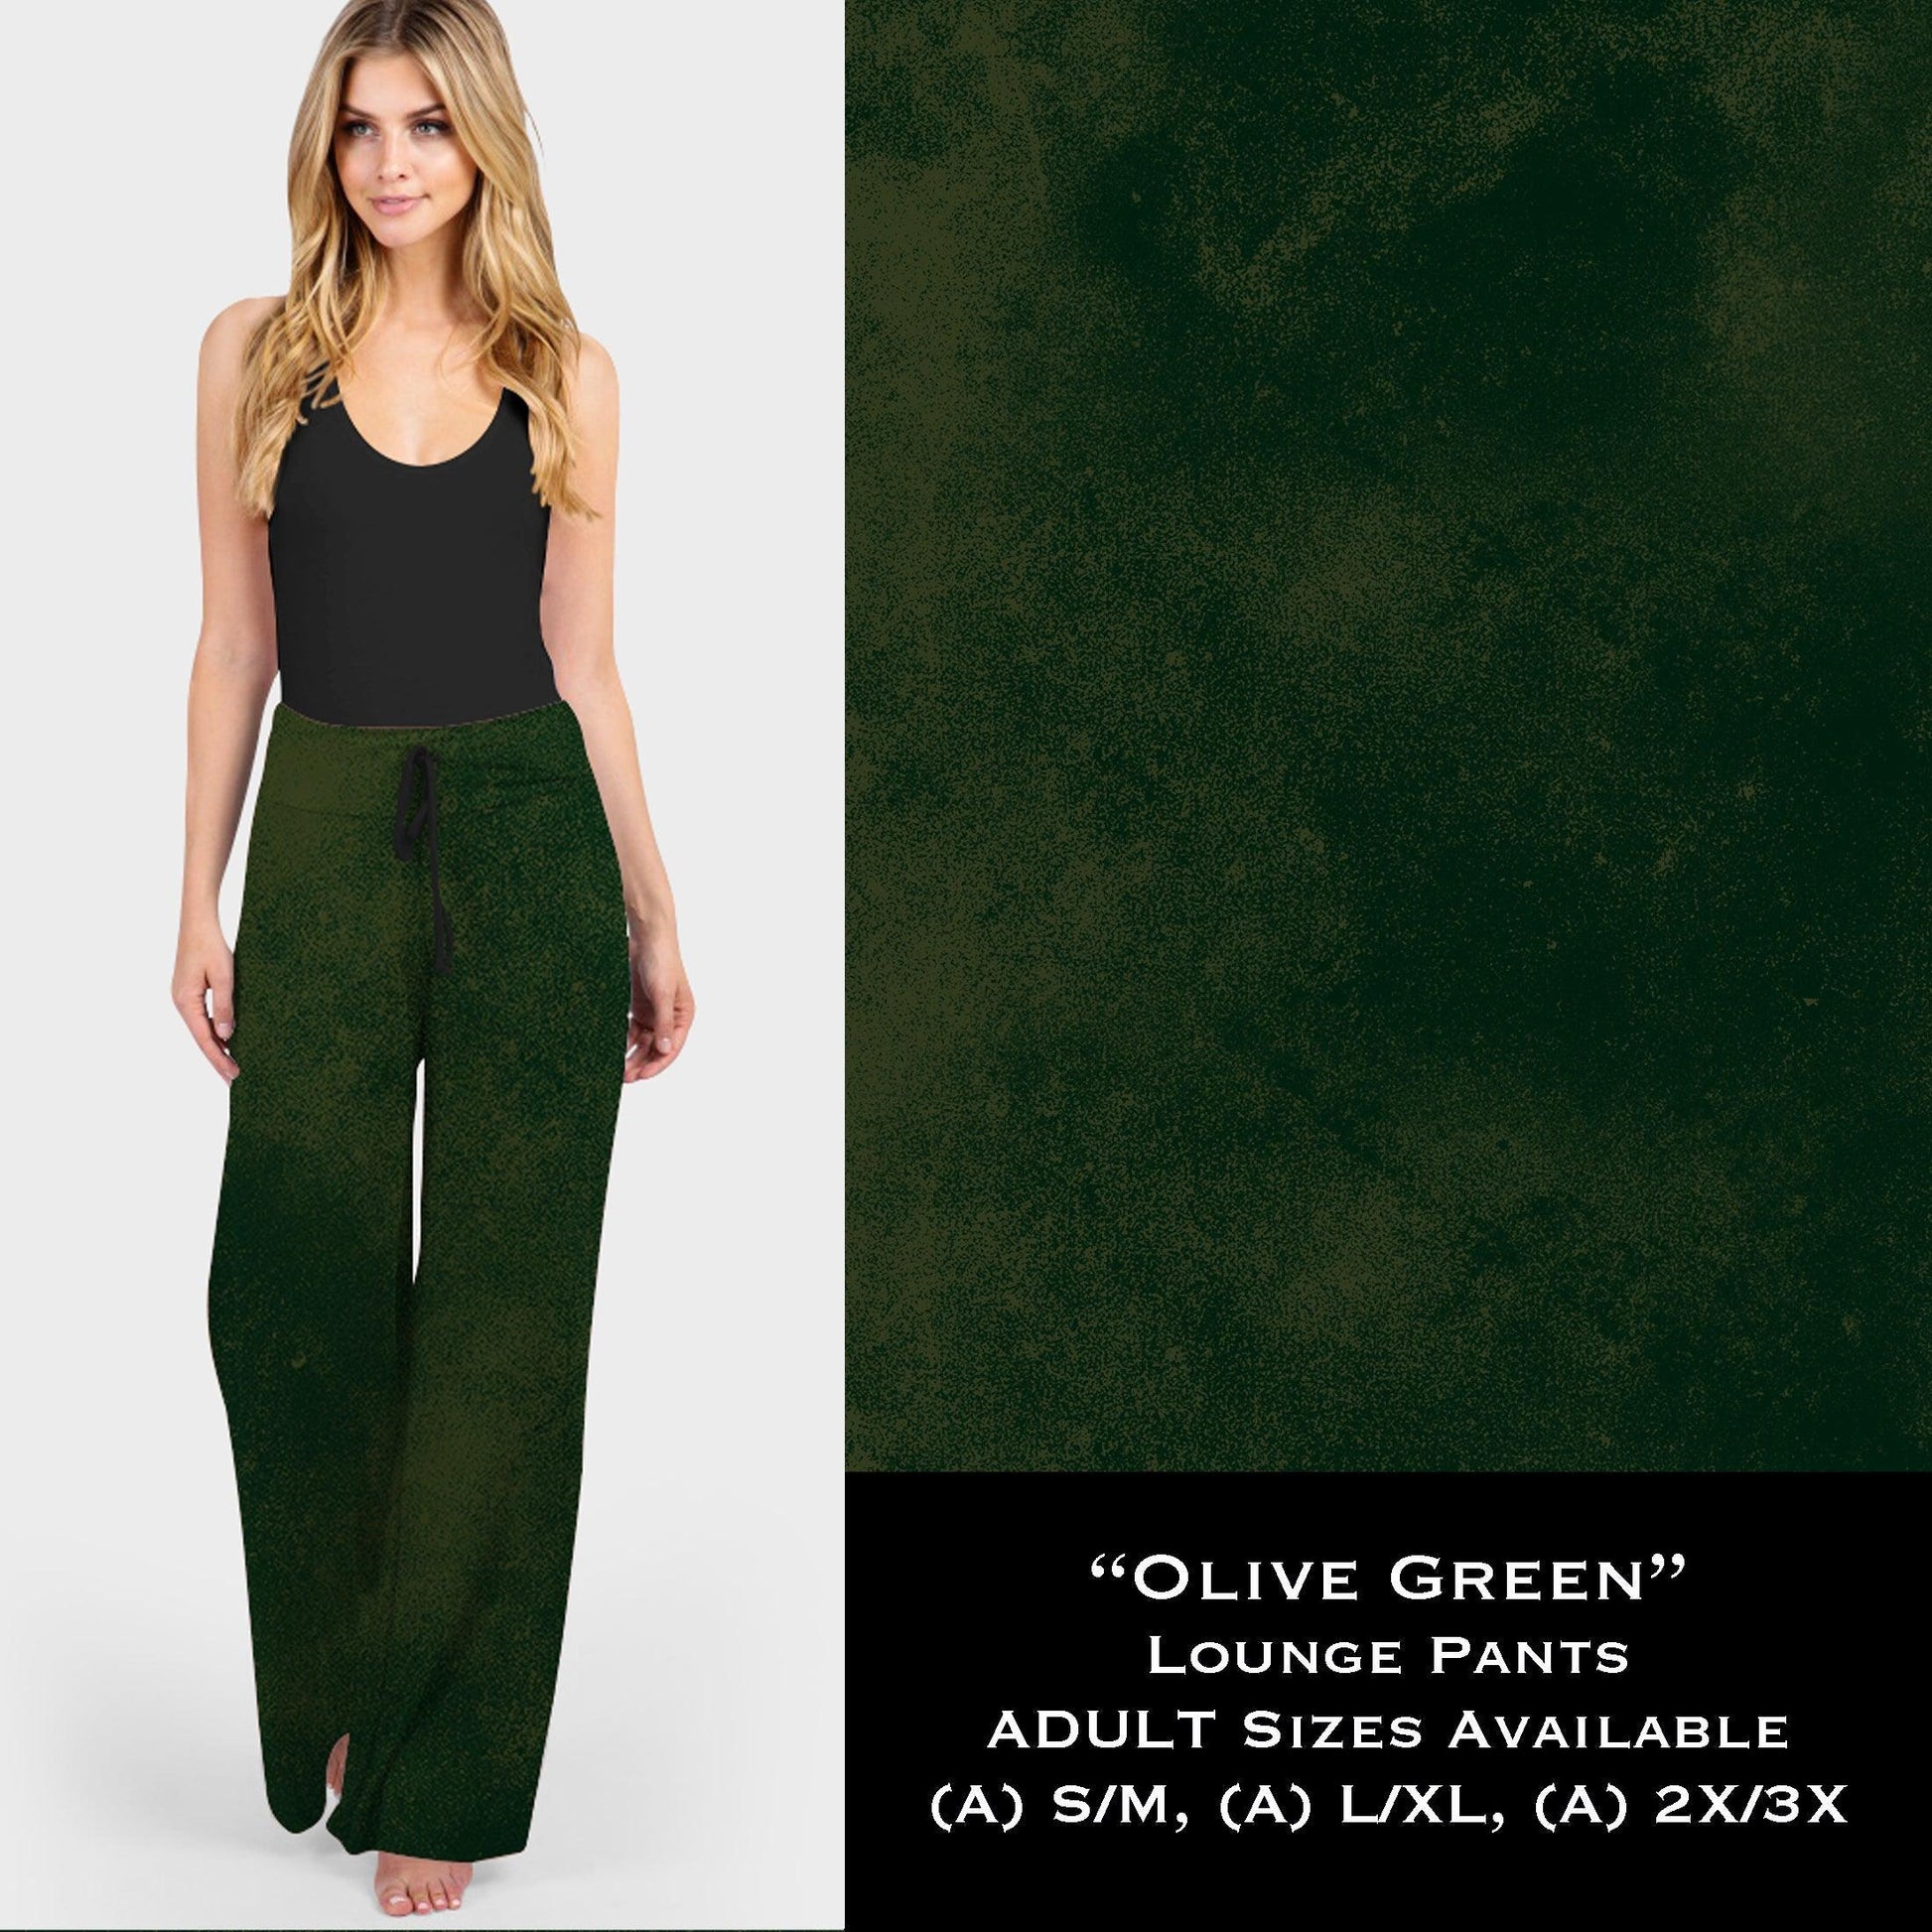 Olive Green *Color Collection* - Lounge Pants - That’s So Fletch Boutique 